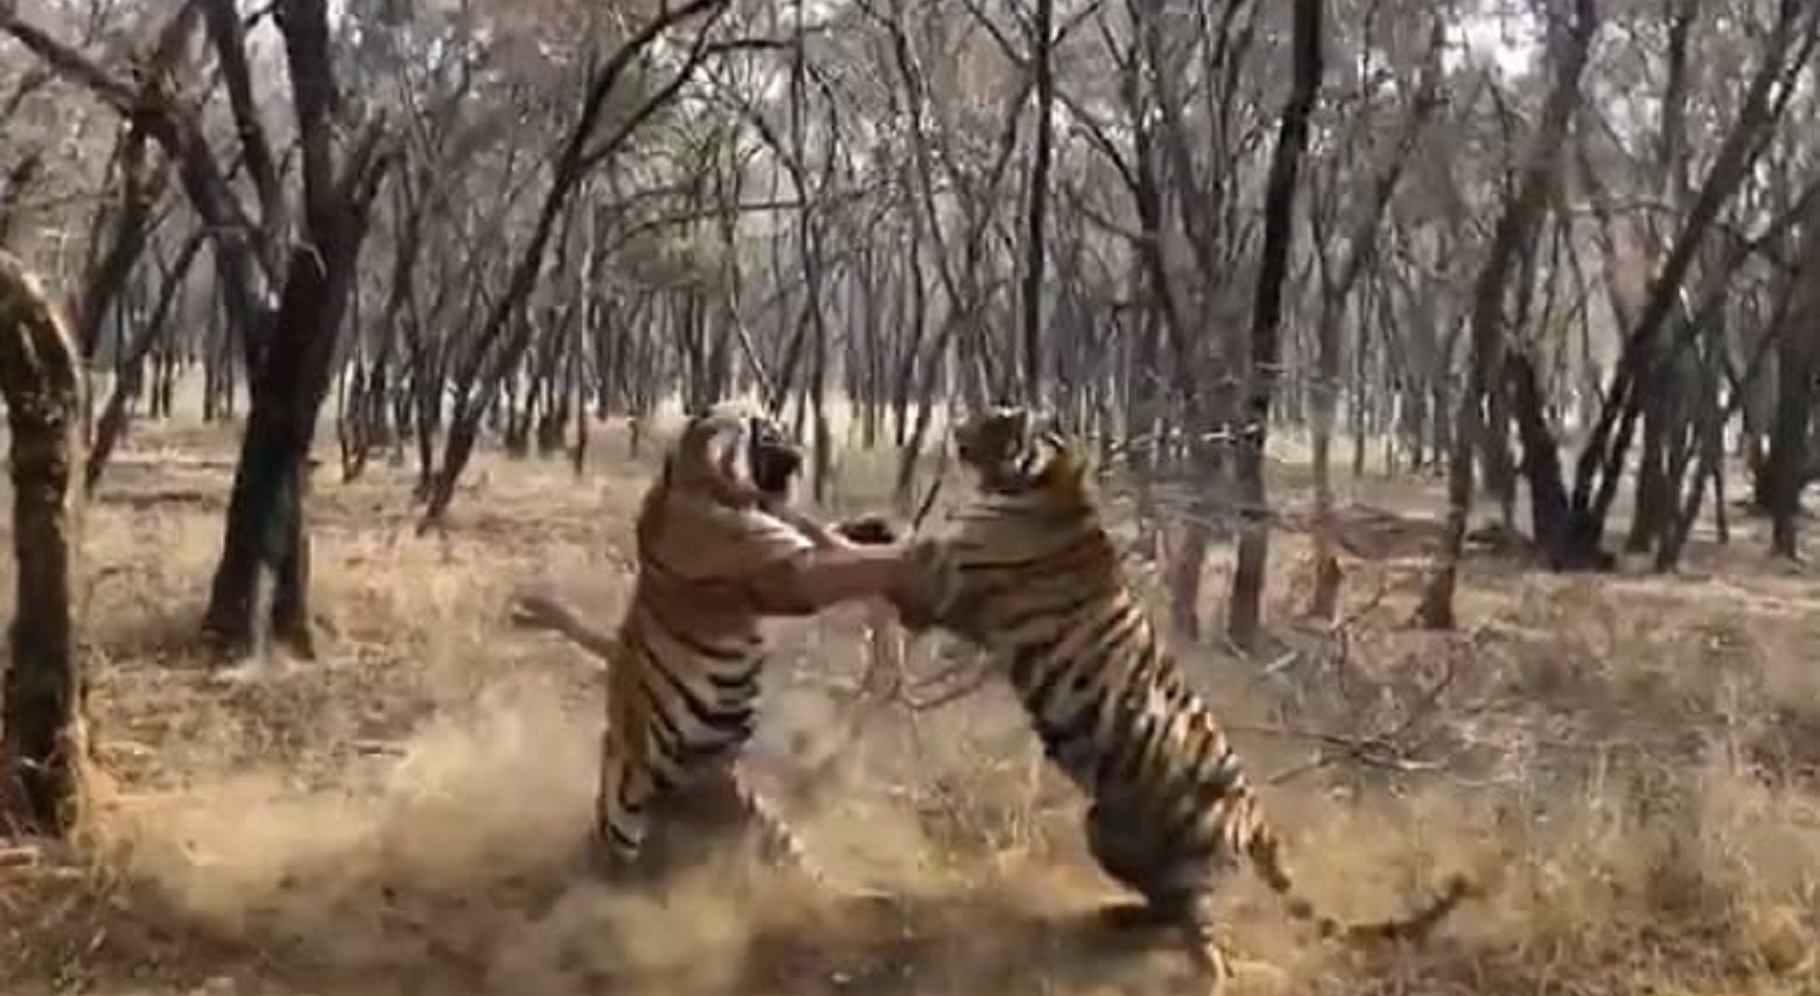 Viral: Rare Video Shows Fierce Fight Between Two Giant Tigers